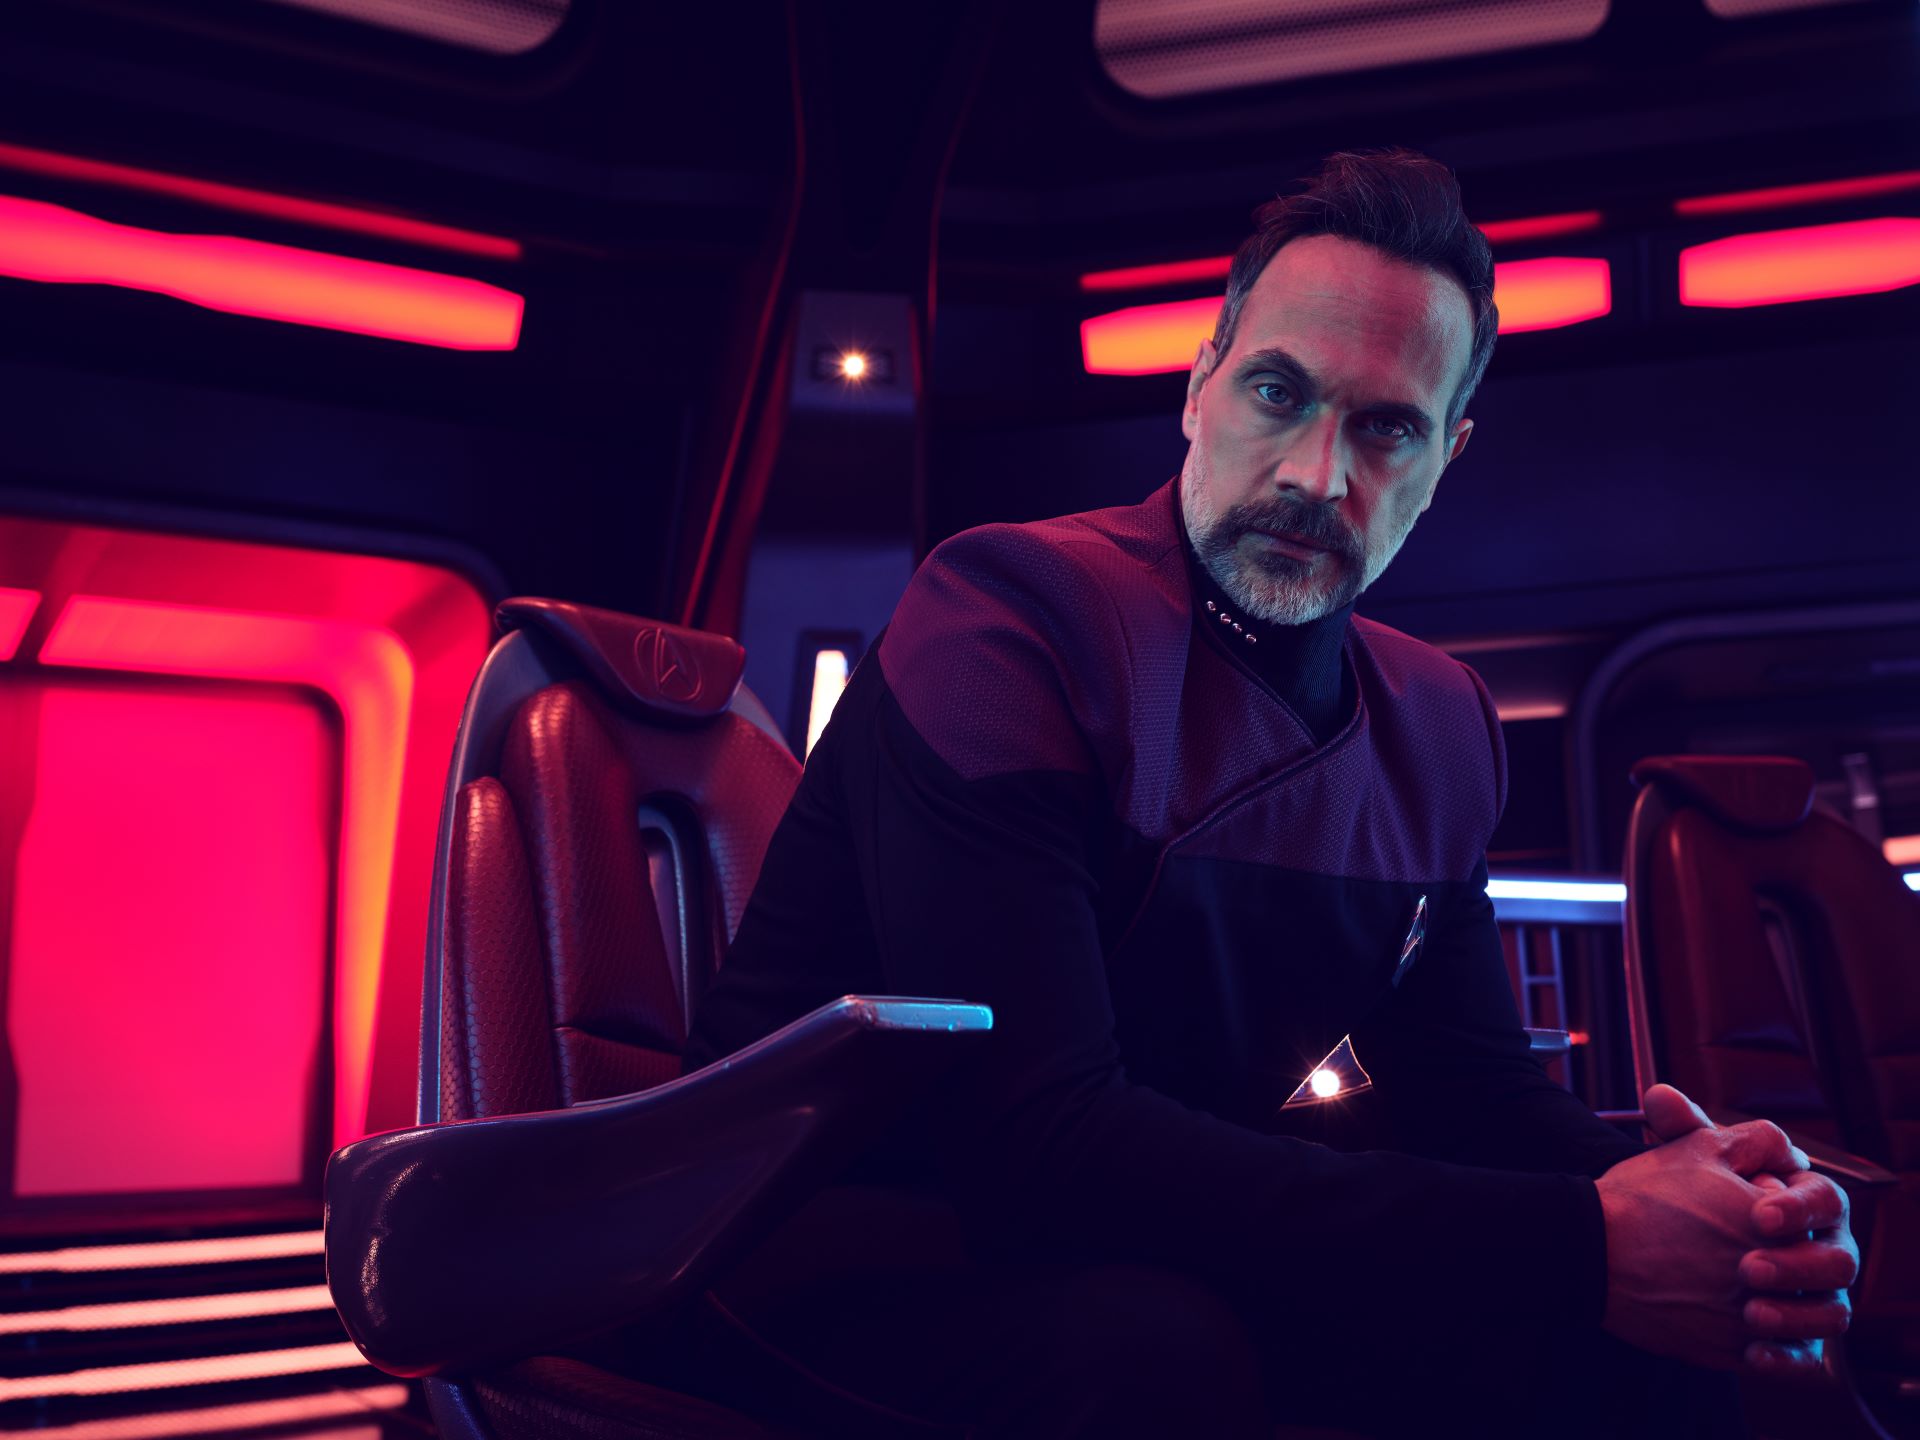 Captain Liam Shaw, played by Todd Stashwick, is one of the new characters for the season.